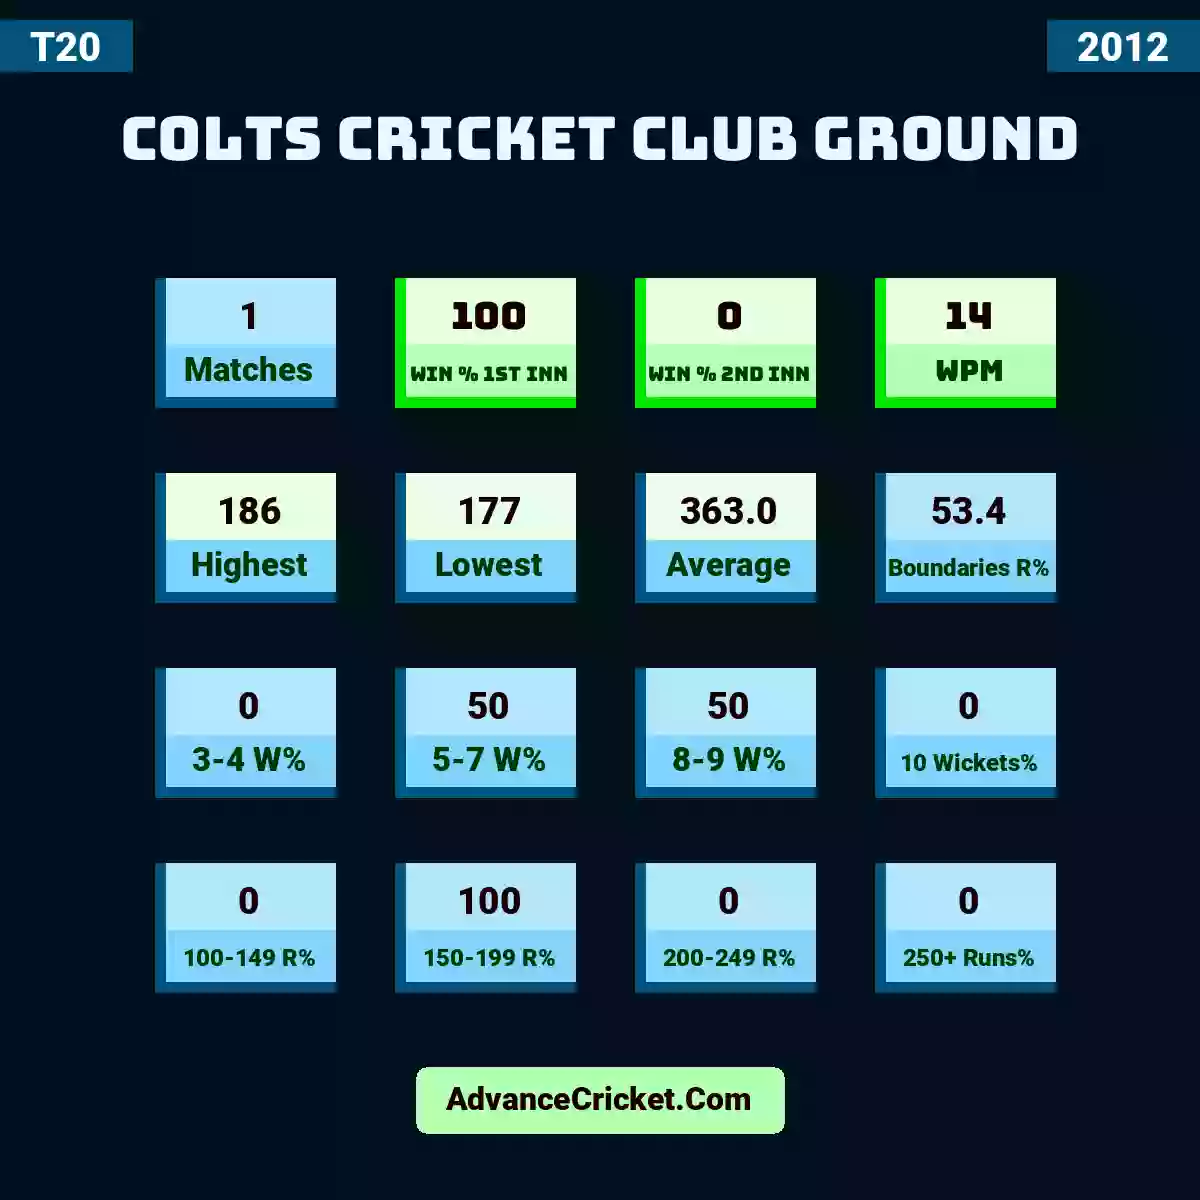 Image showing Colts Cricket Club Ground with Matches: 1, Win % 1st Inn: 100, Win % 2nd Inn: 0, WPM: 14, Highest: 186, Lowest: 177, Average: 363.0, Boundaries R%: 53.4, 3-4 W%: 0, 5-7 W%: 50, 8-9 W%: 50, 10 Wickets%: 0, 100-149 R%: 0, 150-199 R%: 100, 200-249 R%: 0, 250+ Runs%: 0.